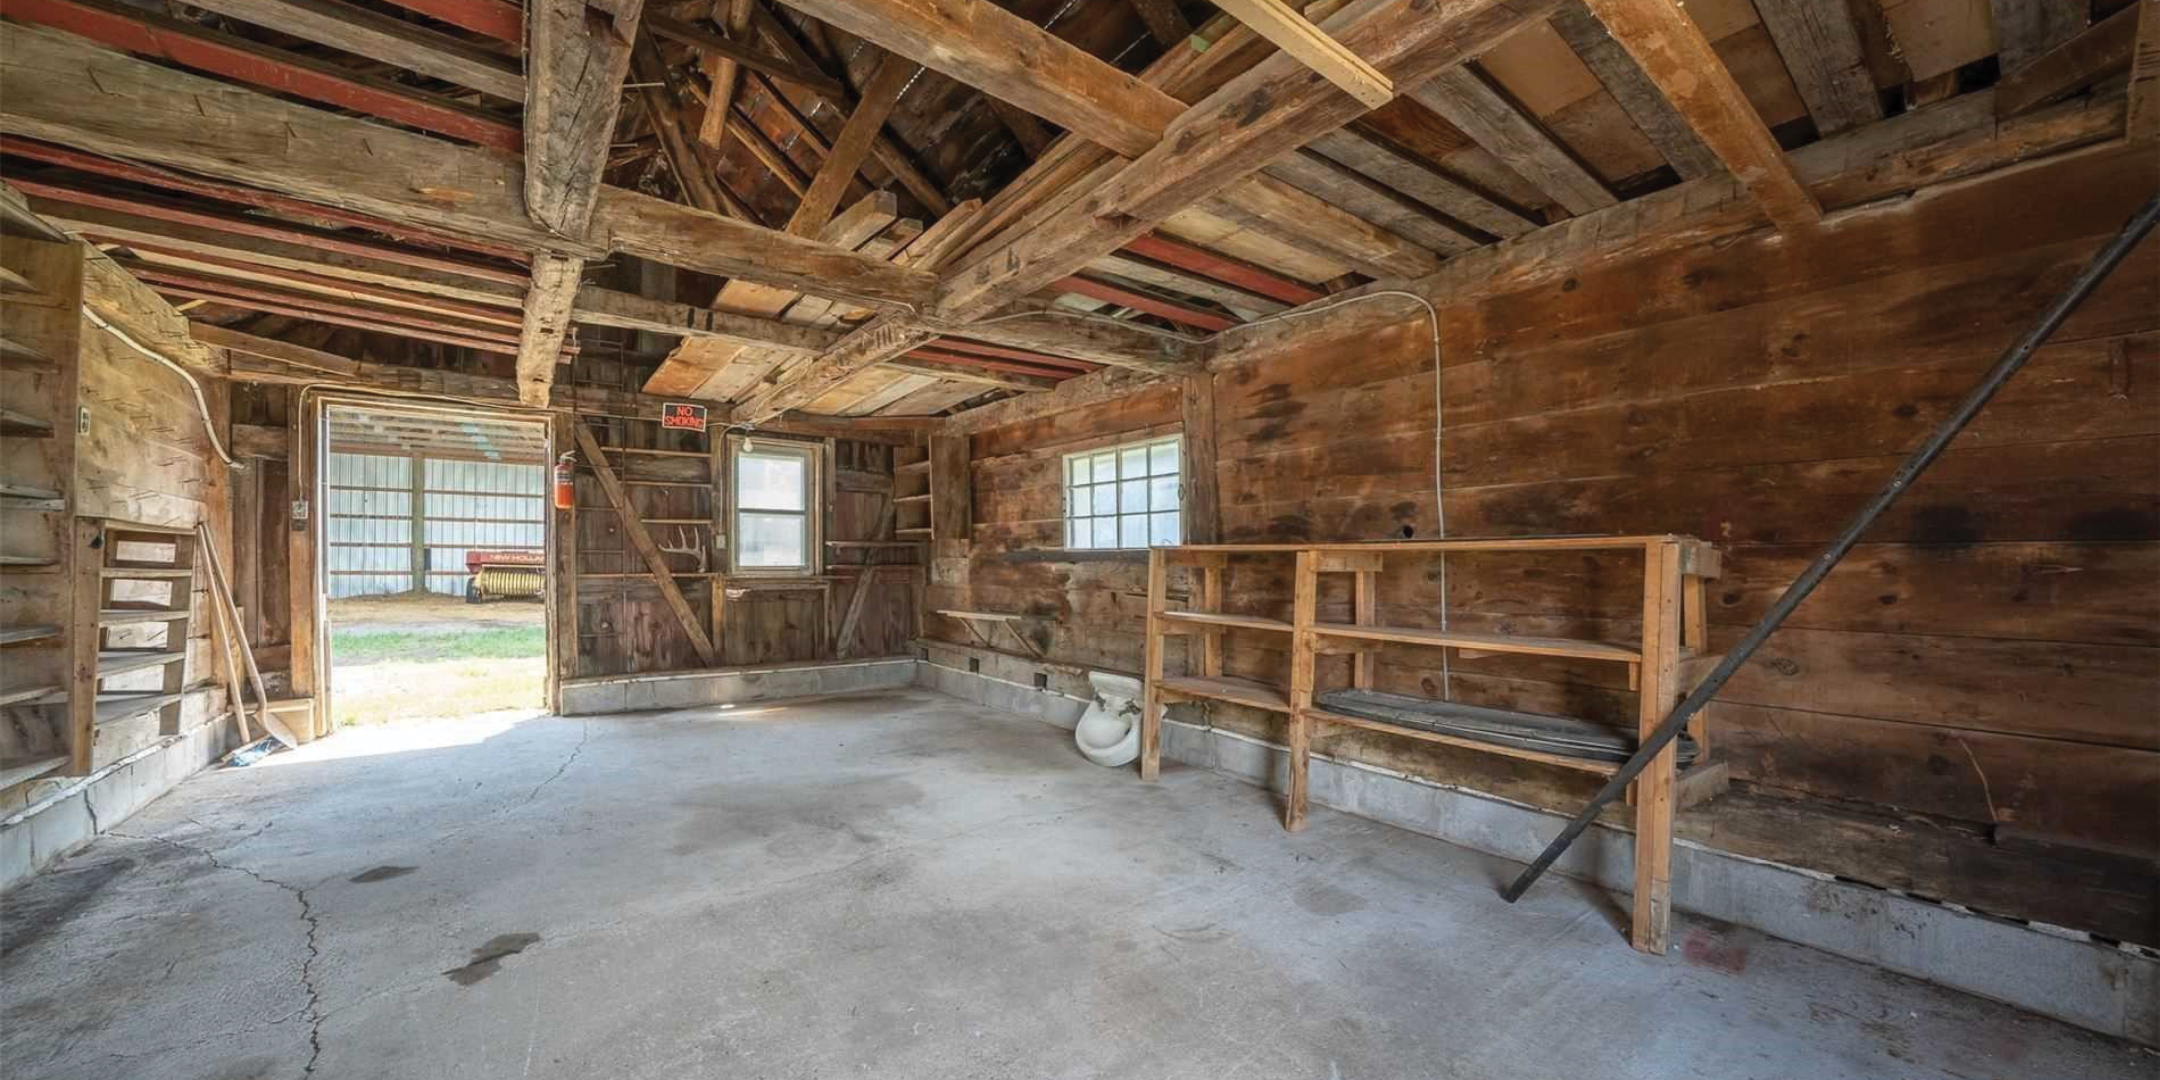 1134 County Road 15 Shed Interior with Wooden Beams